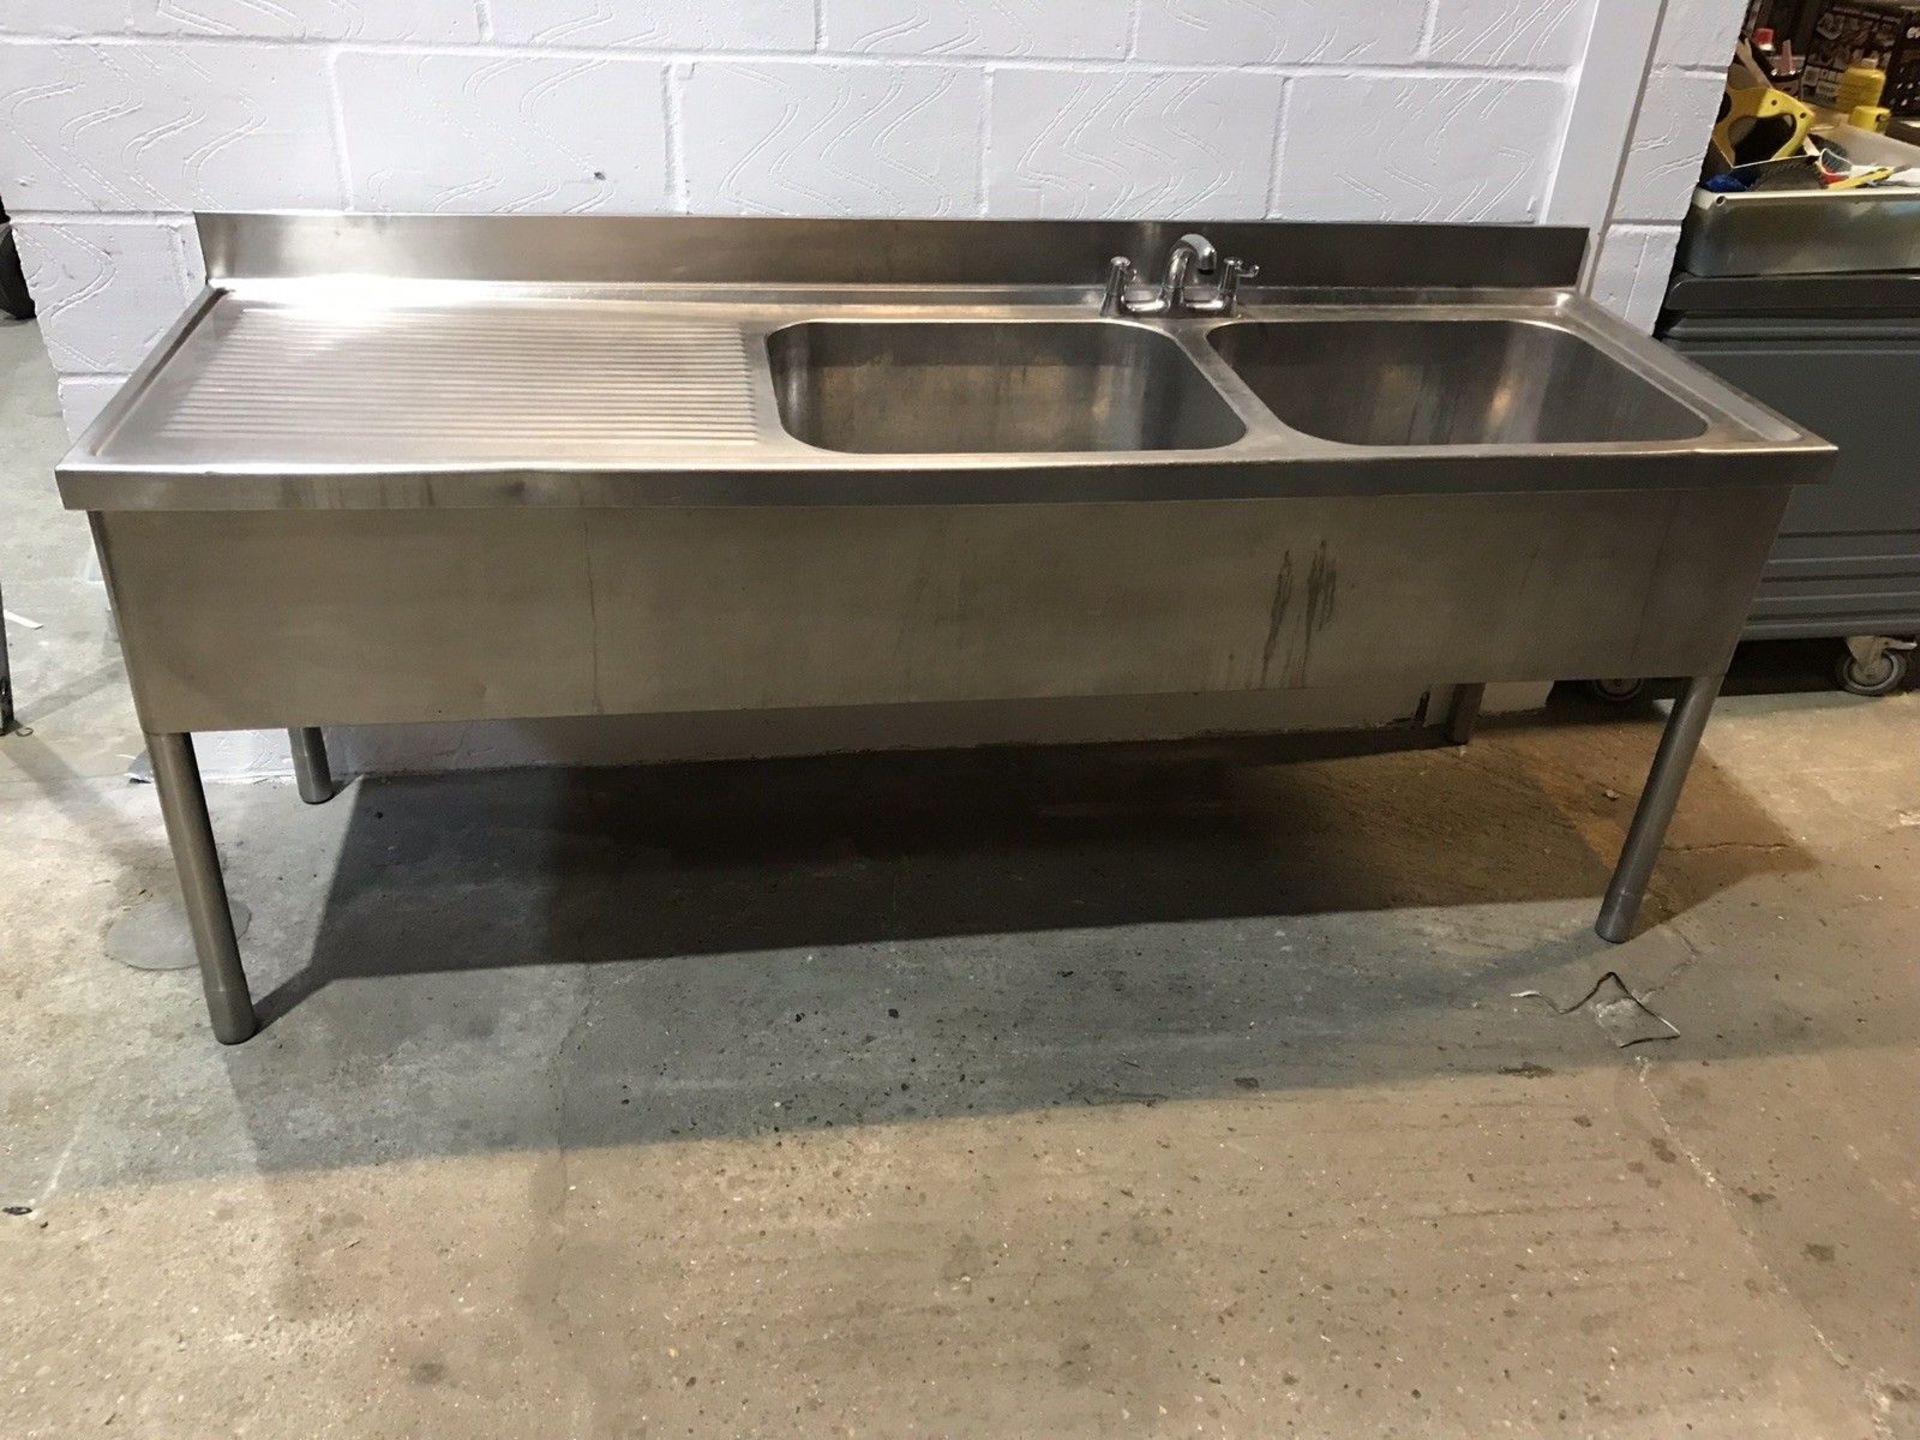 Stainless Steel Double Bowl Sink With Lefthand Drainer, Upstand and Shelf - Image 5 of 6